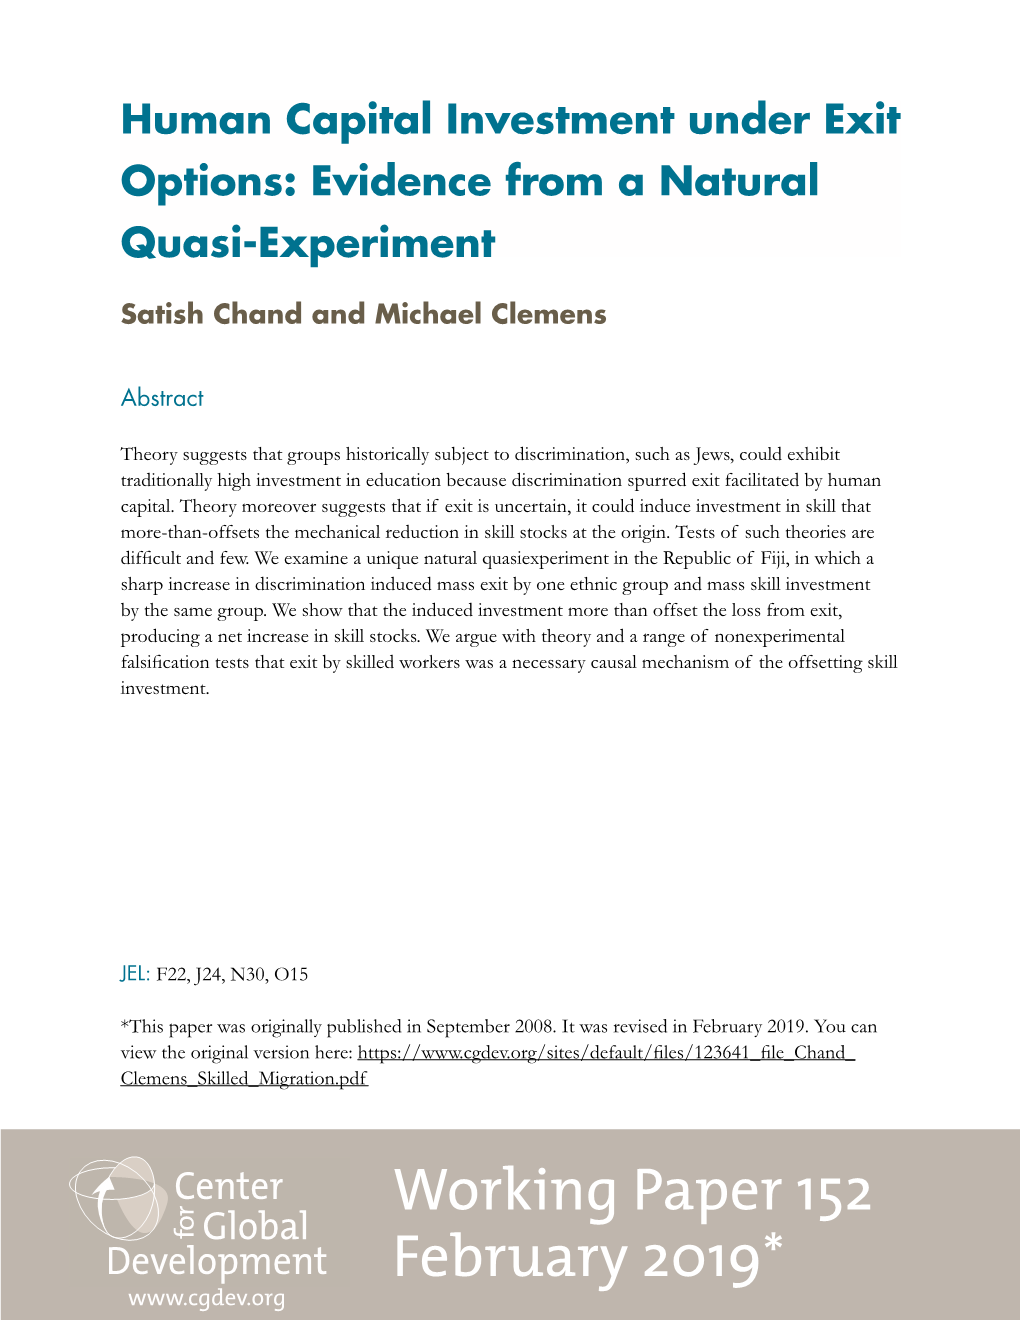 Human Capital Investment Under Exit Options: Evidence from a Natural Quasi-Experiment